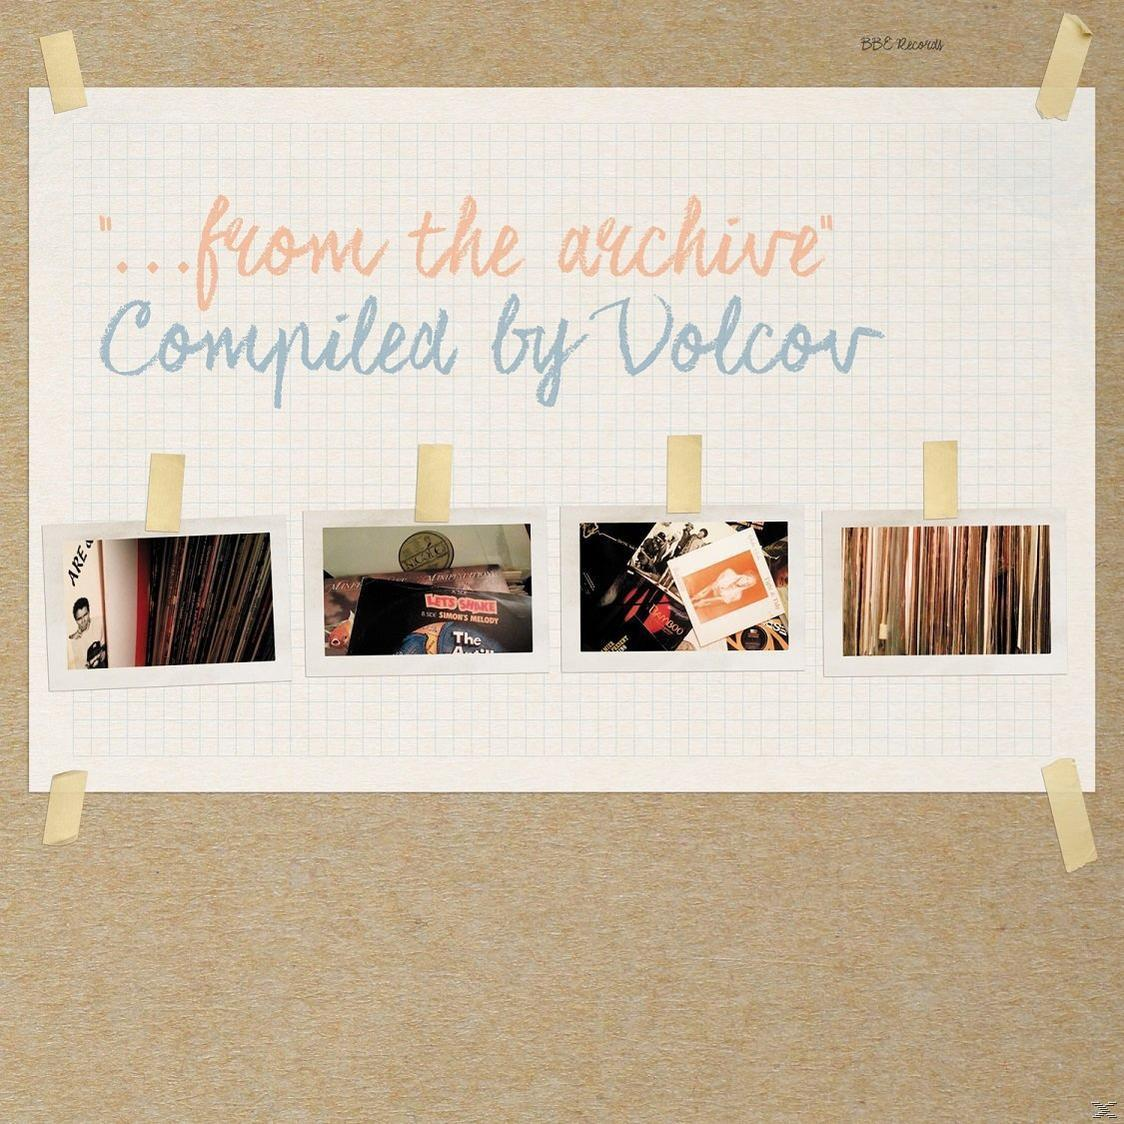 Volcov, VARIOUS - From The (Vinyl) Archive 